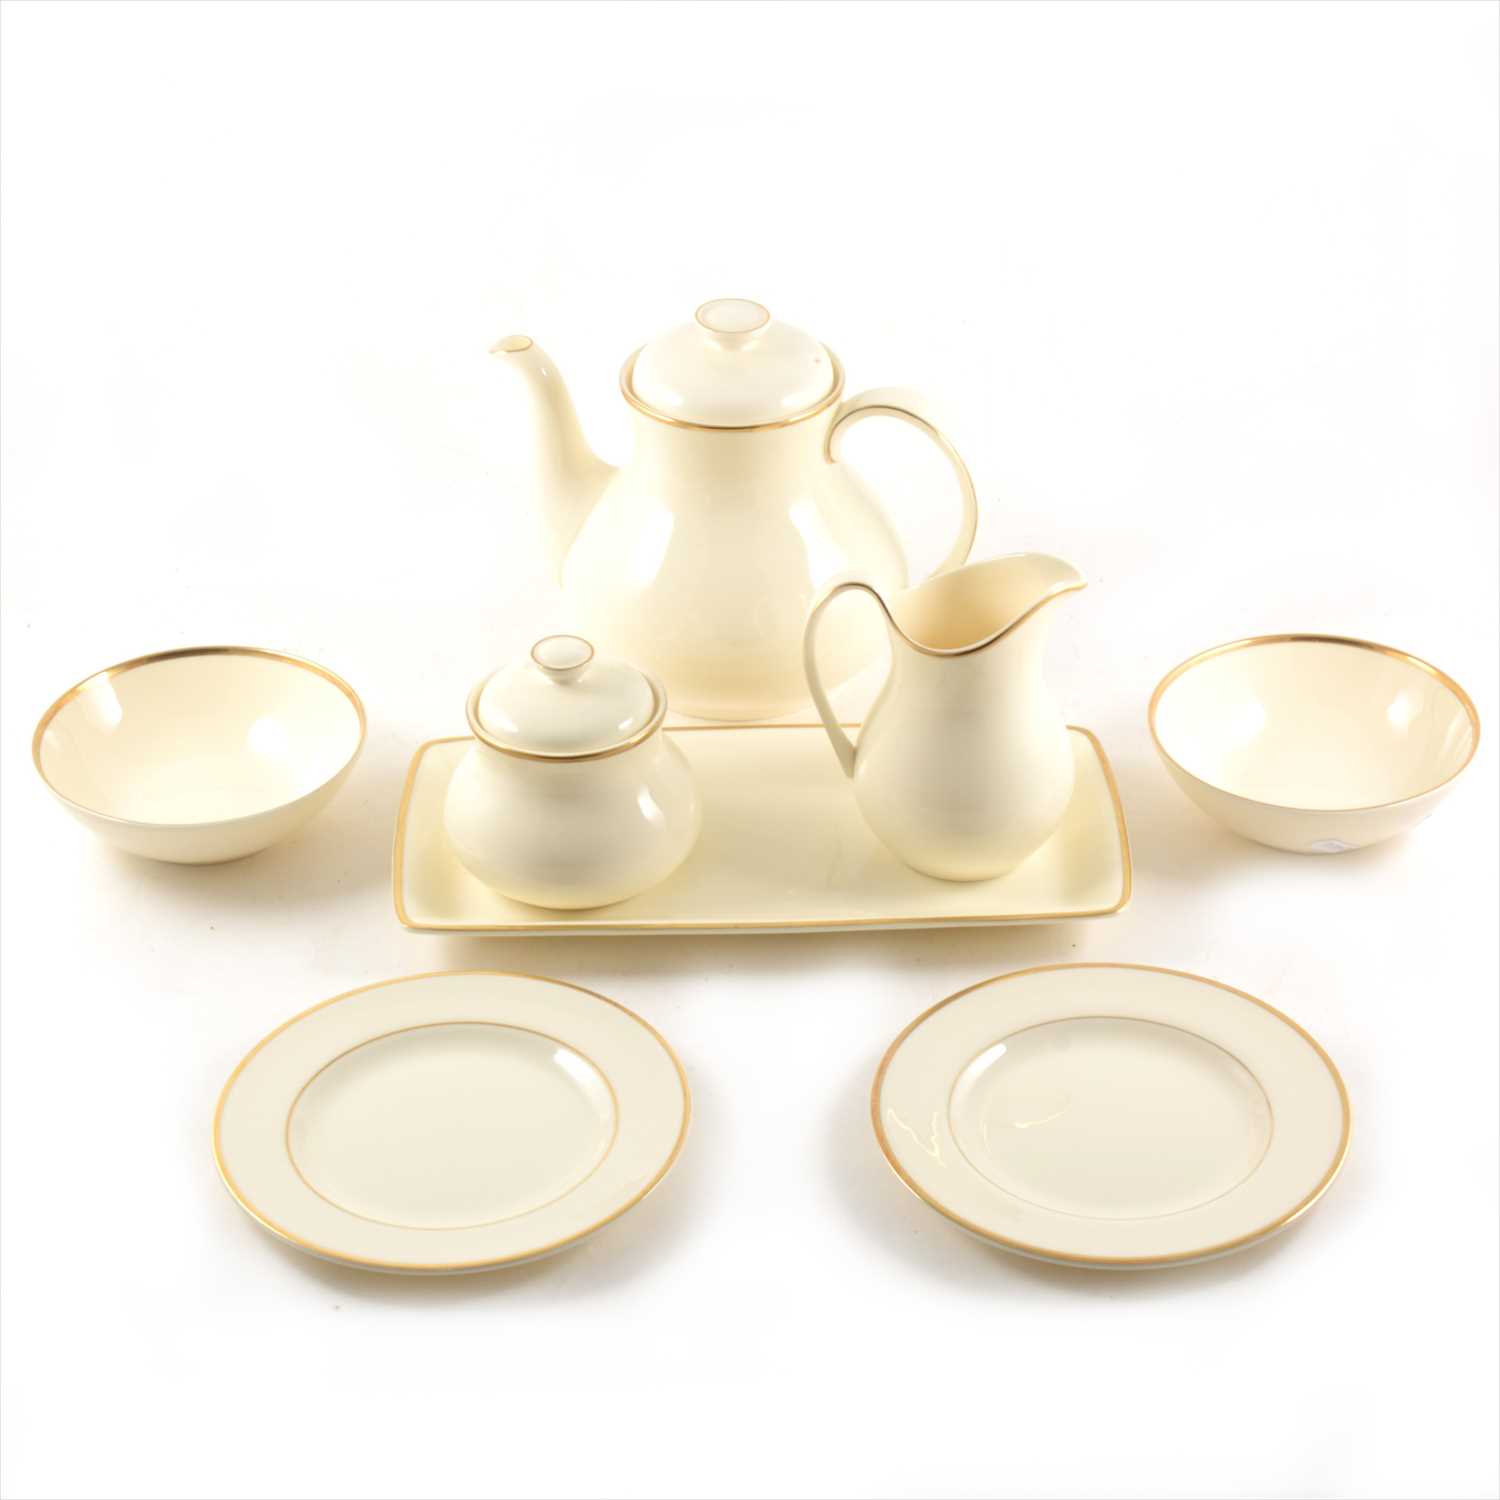 Lot 57 - Royal Doulton bone china dinner and tea service, 'Heather' from the Romance Collection.